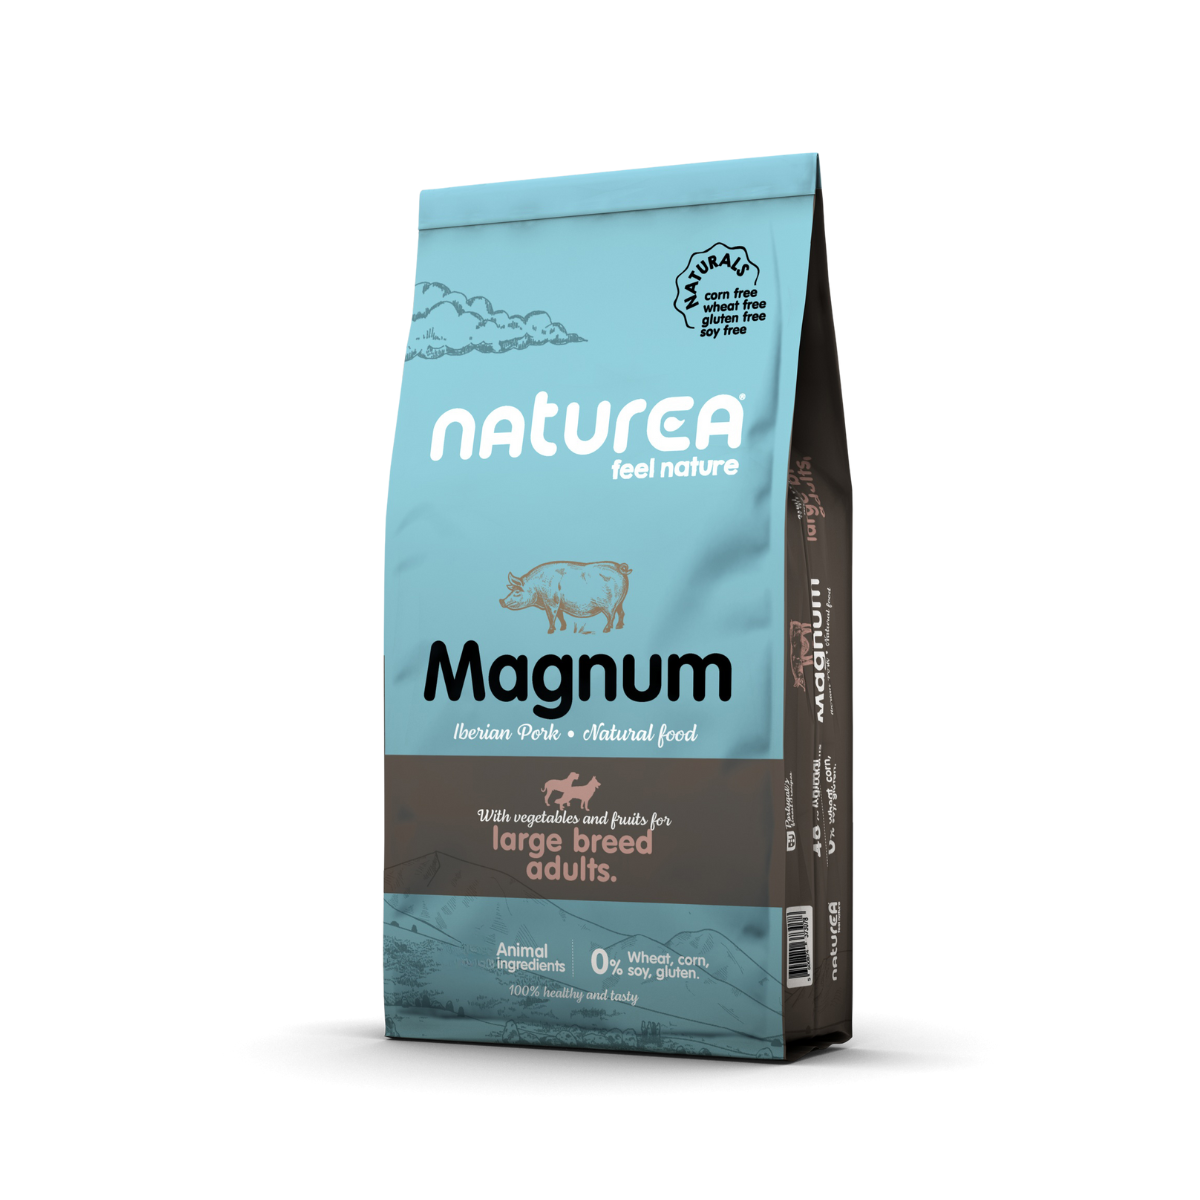 High-quality feed with Iberian pork meat for adult dogs Naturea Naturals